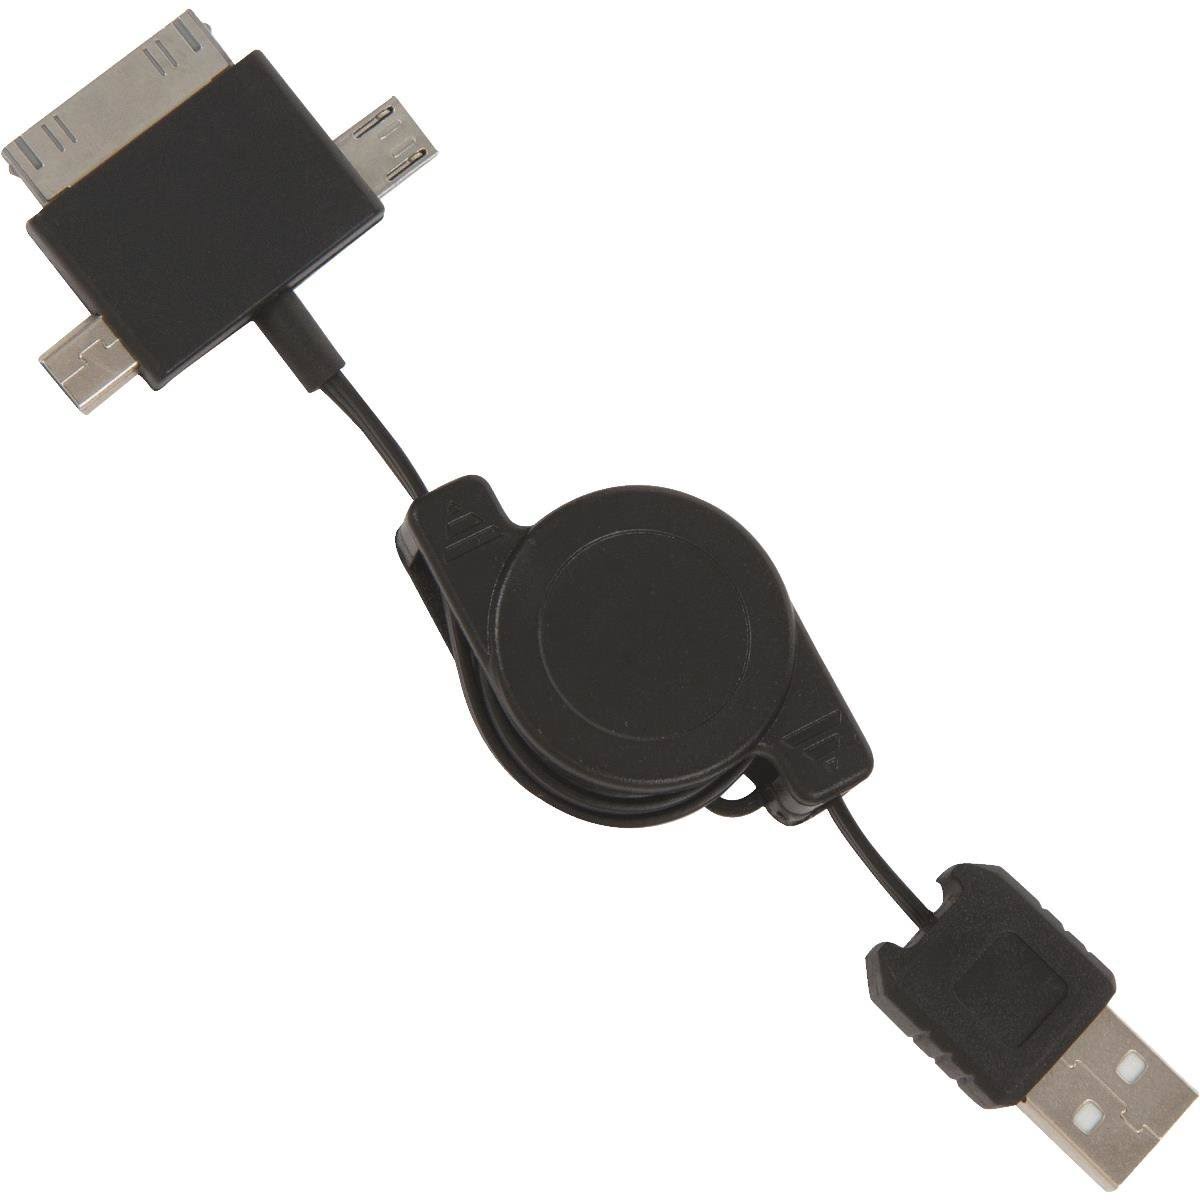 ARIES Micro USB Cable for Smart Phones - Black